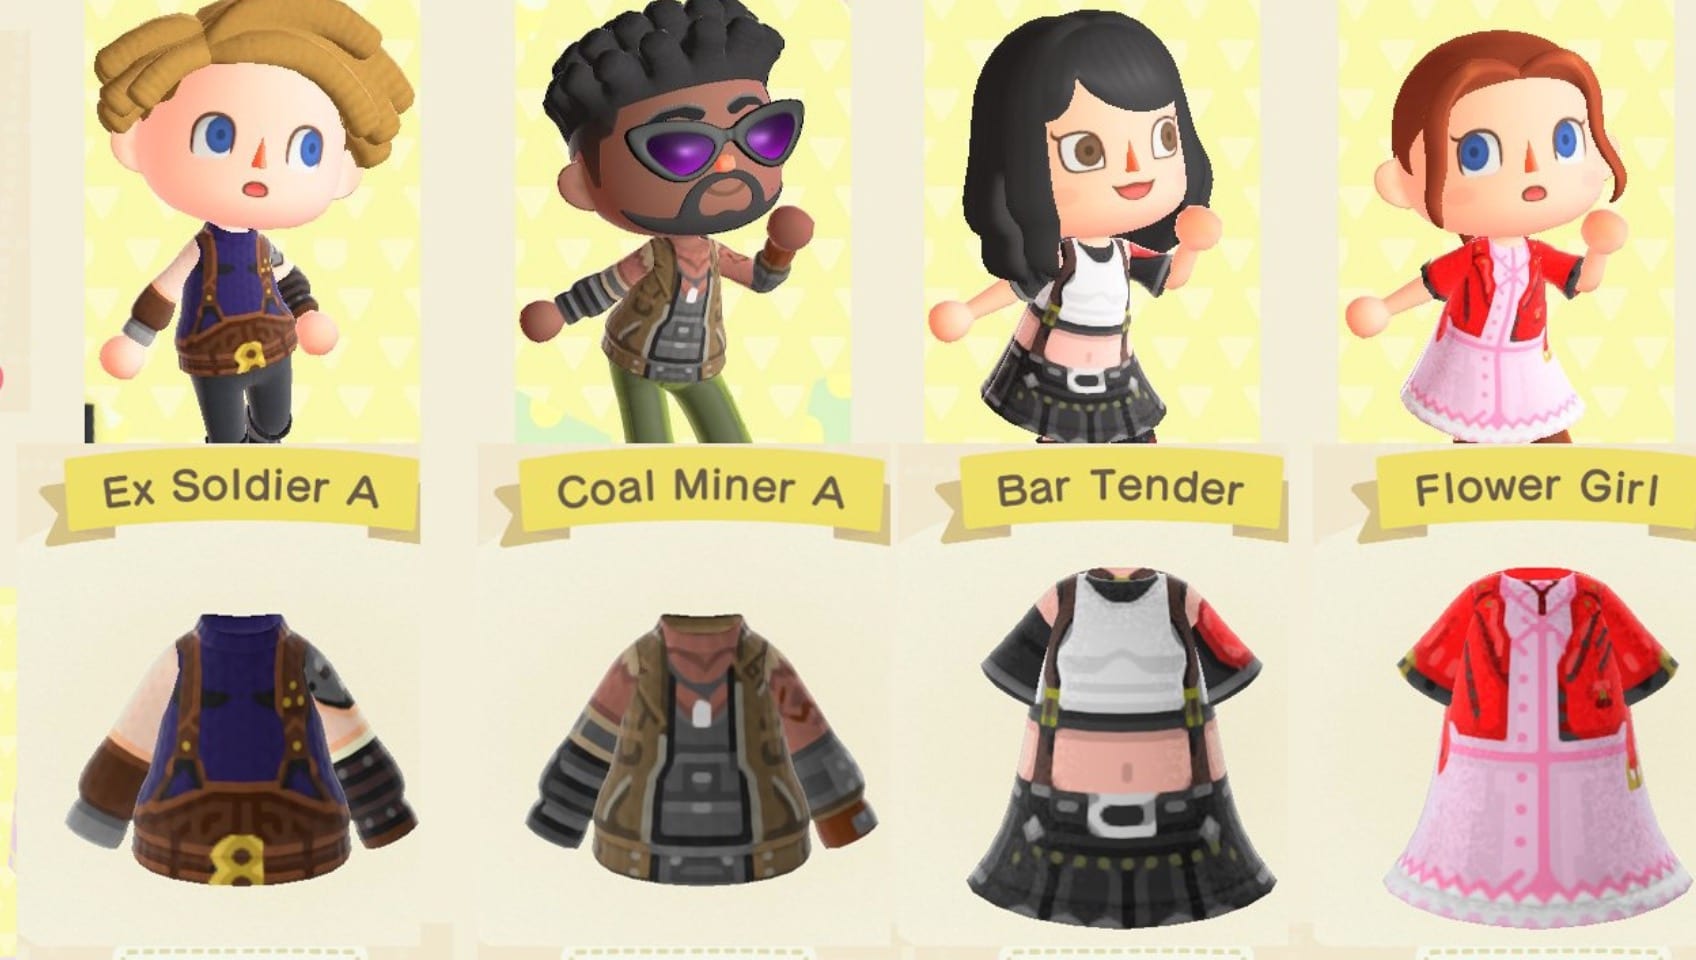 Download Dress as the Final Fantasy VII Gang With These Adorable ...